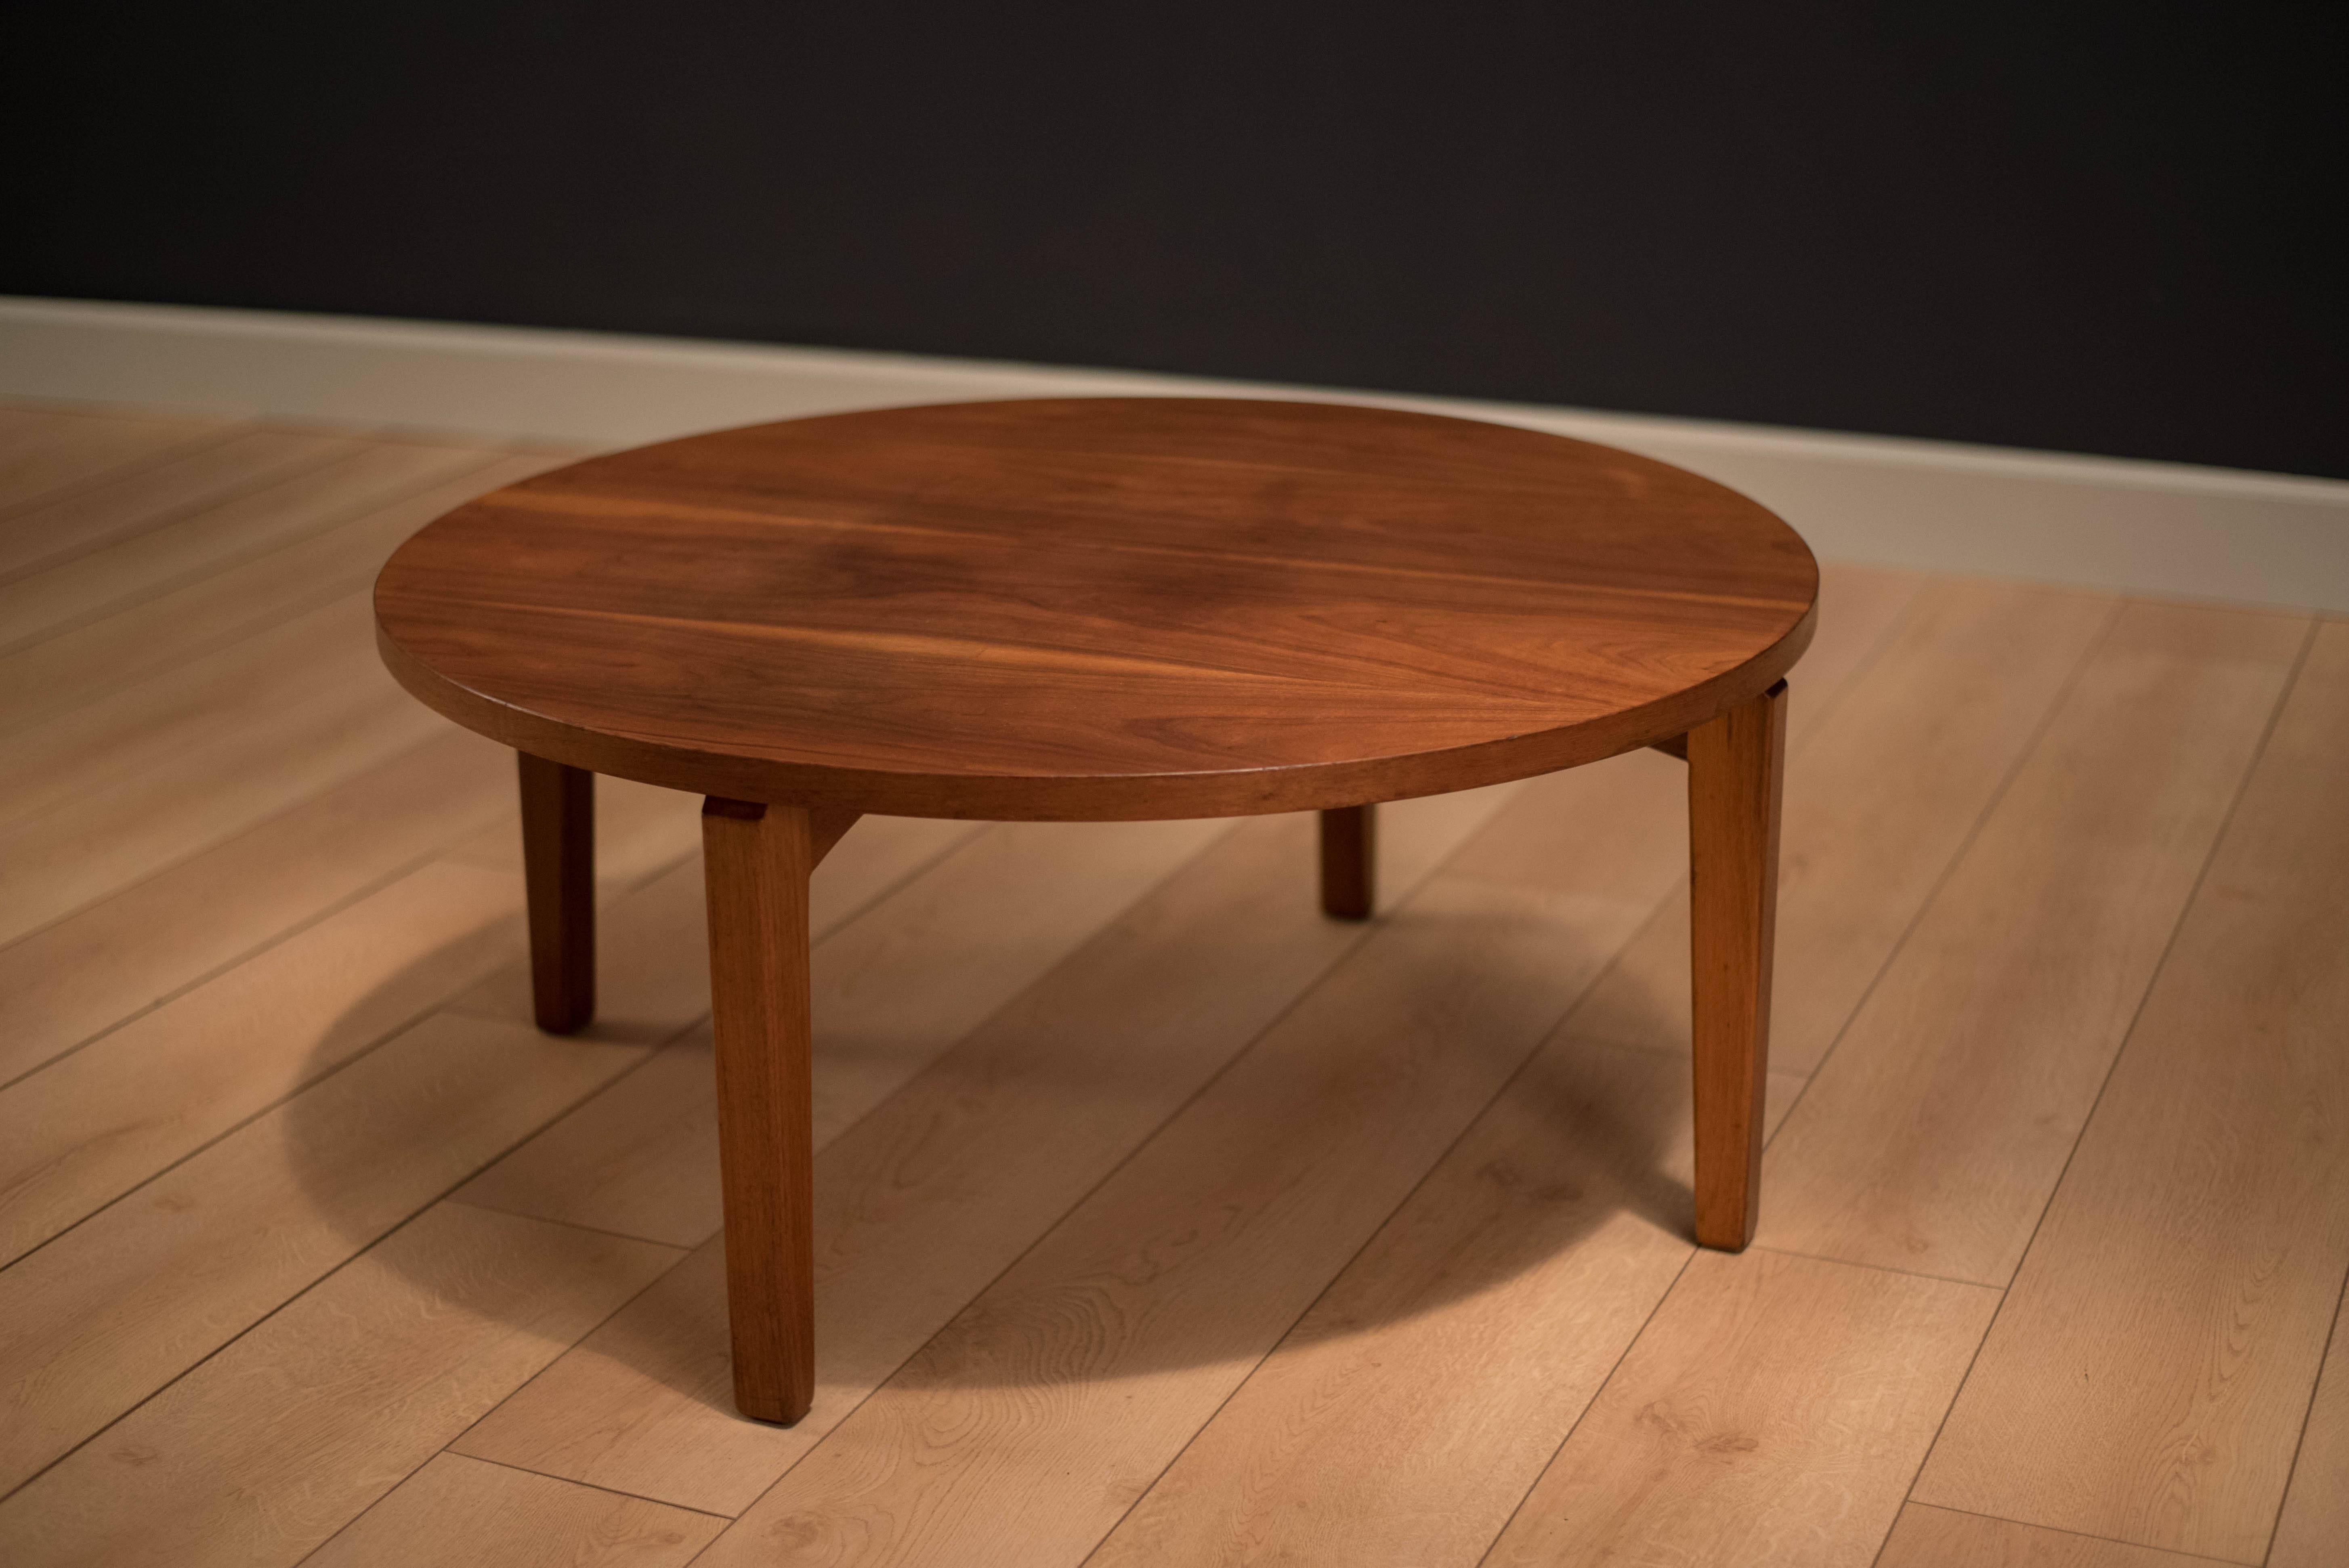 Mid-Century round coffee table in walnut manufactured by B.L. Marble Furniture. This piece features a unique modern base and a warm walnut grain top.